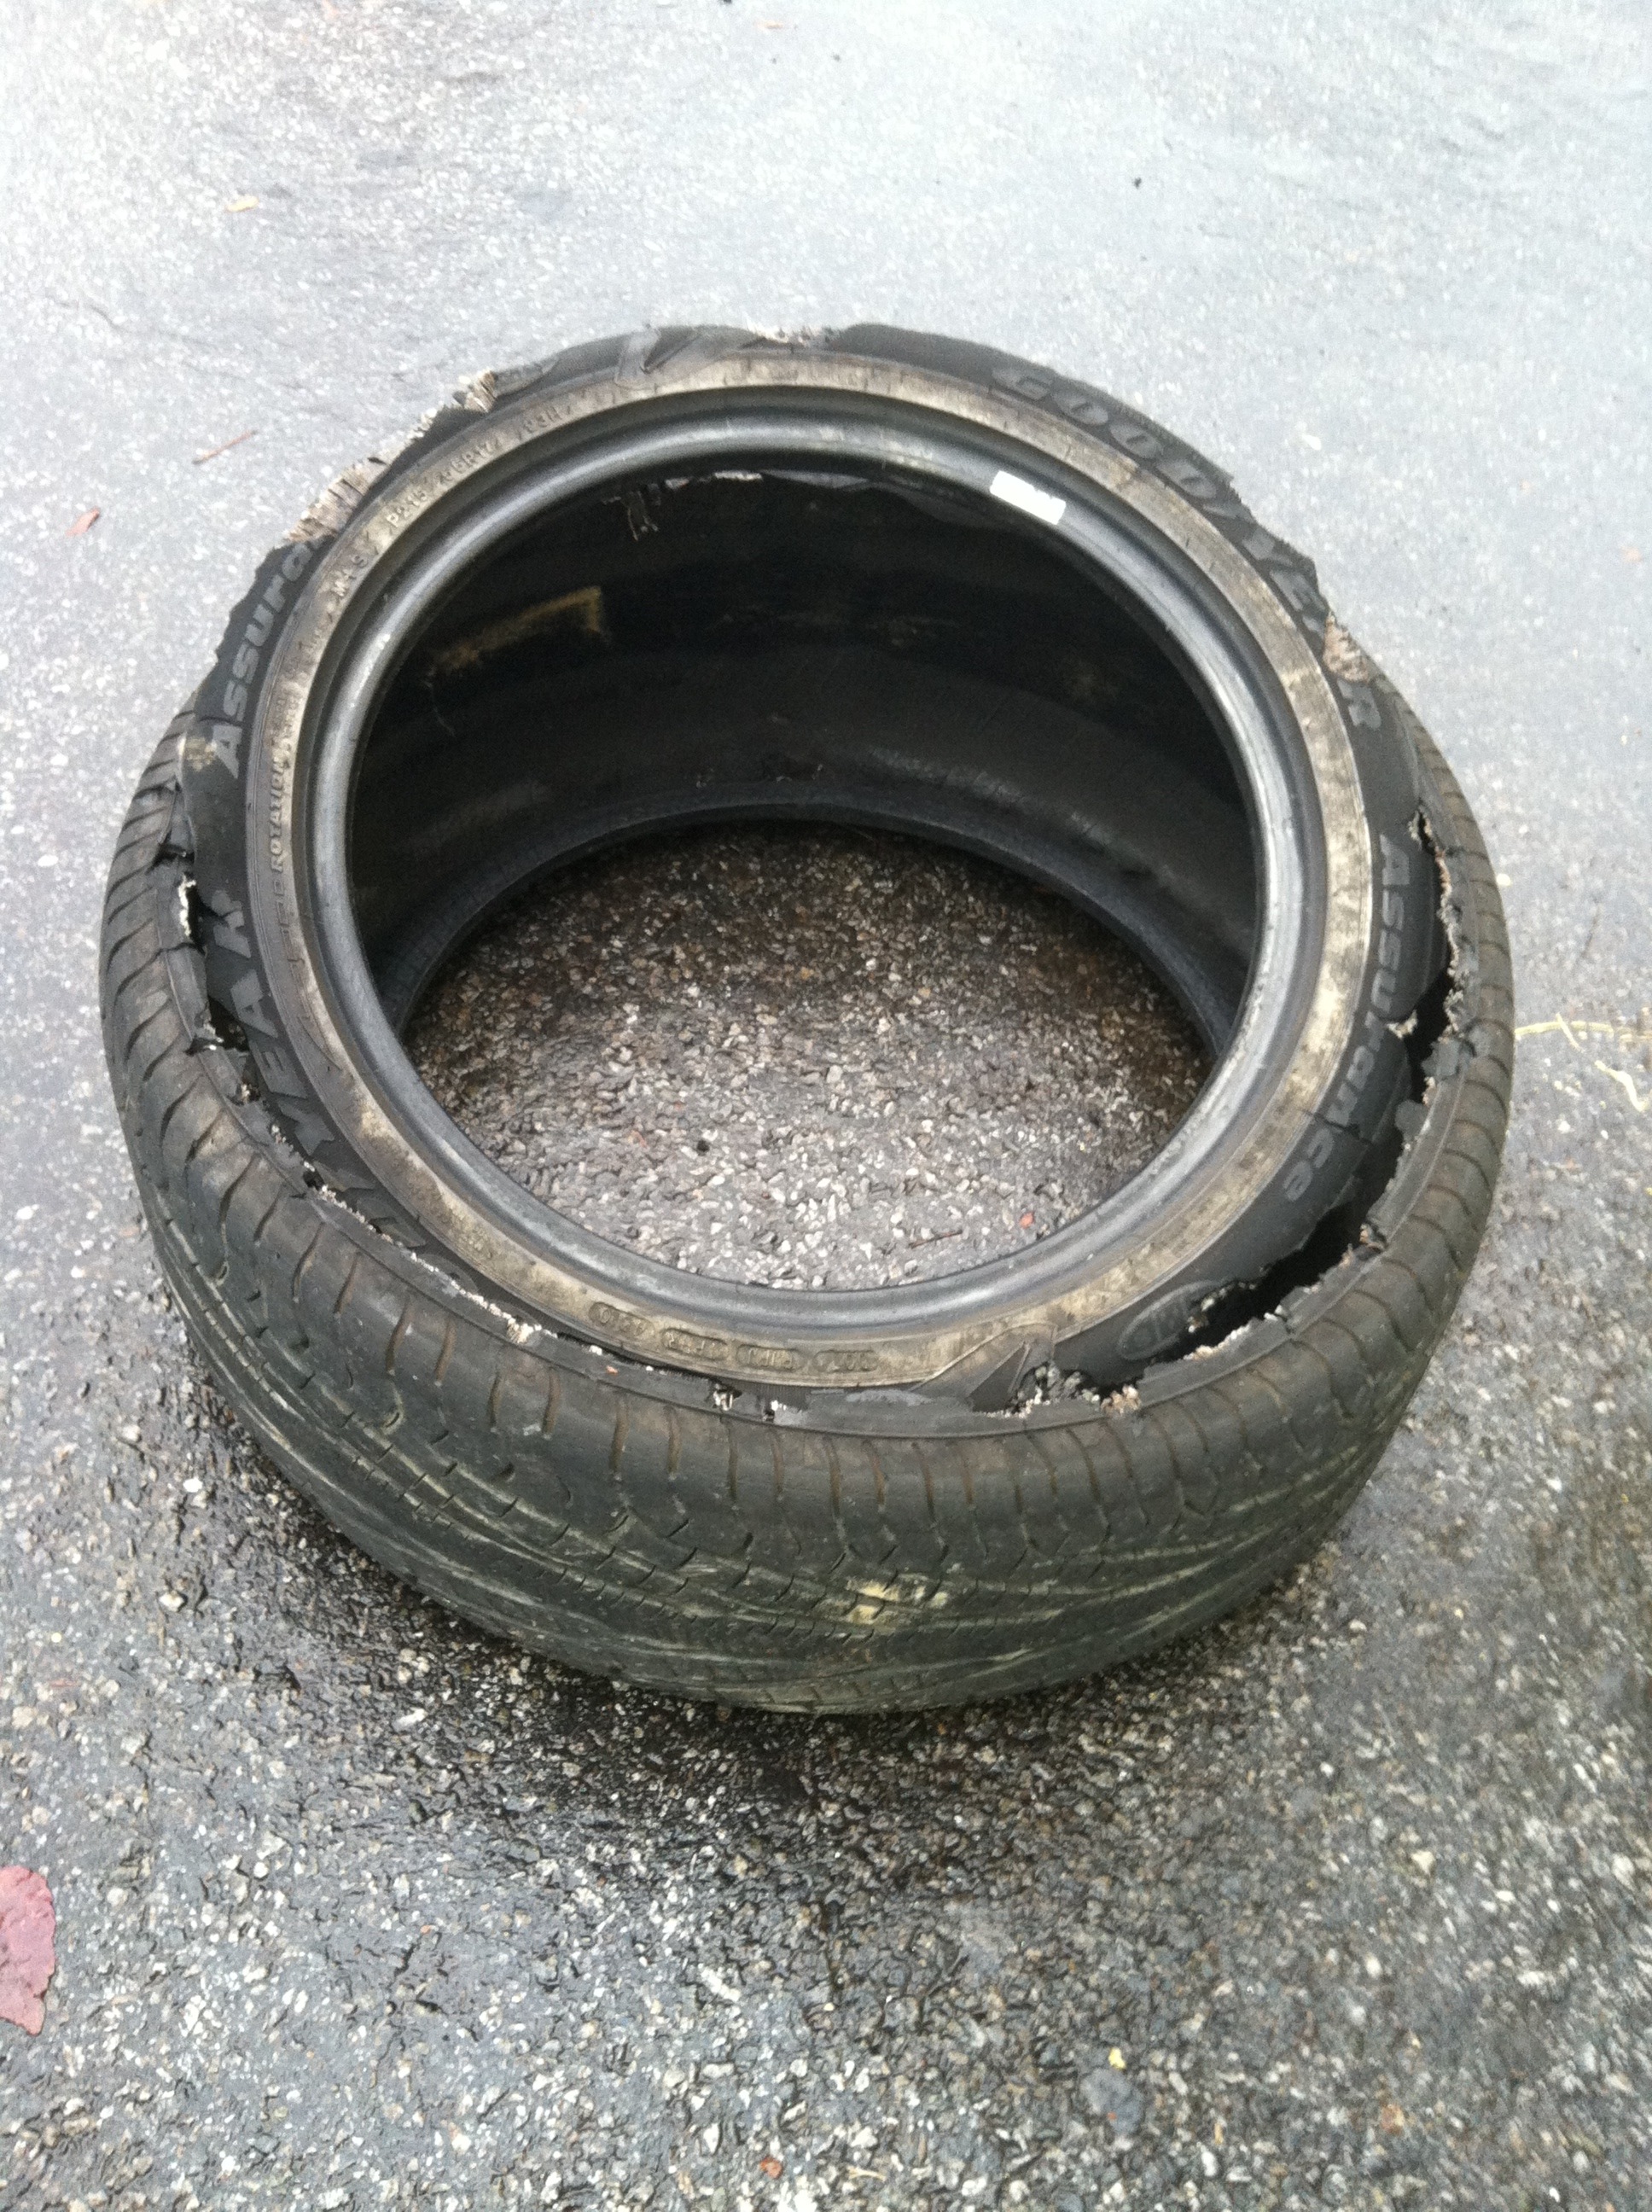 extremely rotted tire.jpg